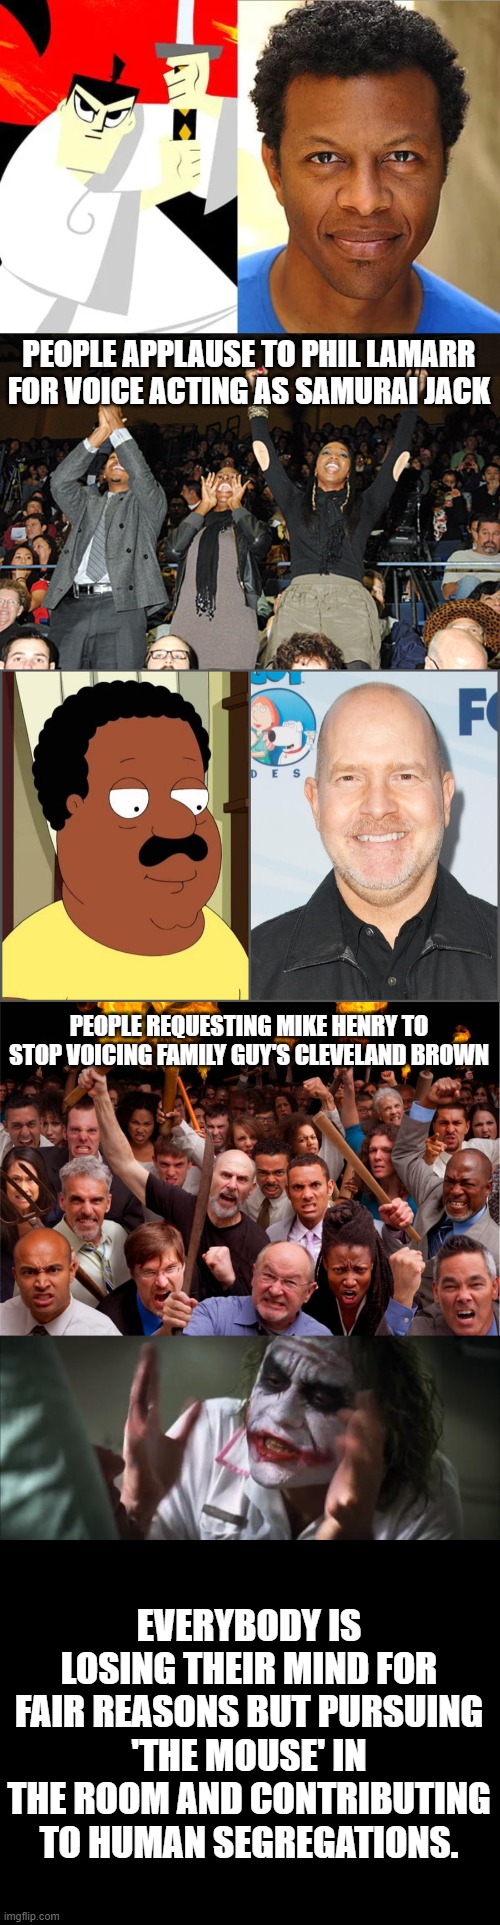 'In Living Color' teached us cohesion not segregation | PEOPLE APPLAUSE TO PHIL LAMARR FOR VOICE ACTING AS SAMURAI JACK; PEOPLE REQUESTING MIKE HENRY TO STOP VOICING FAMILY GUY'S CLEVELAND BROWN; EVERYBODY IS LOSING THEIR MIND FOR FAIR REASONS BUT PURSUING 'THE MOUSE' IN THE ROOM AND CONTRIBUTING TO HUMAN SEGREGATIONS. | image tagged in memes,and everybody loses their minds,applause,angry mob | made w/ Imgflip meme maker